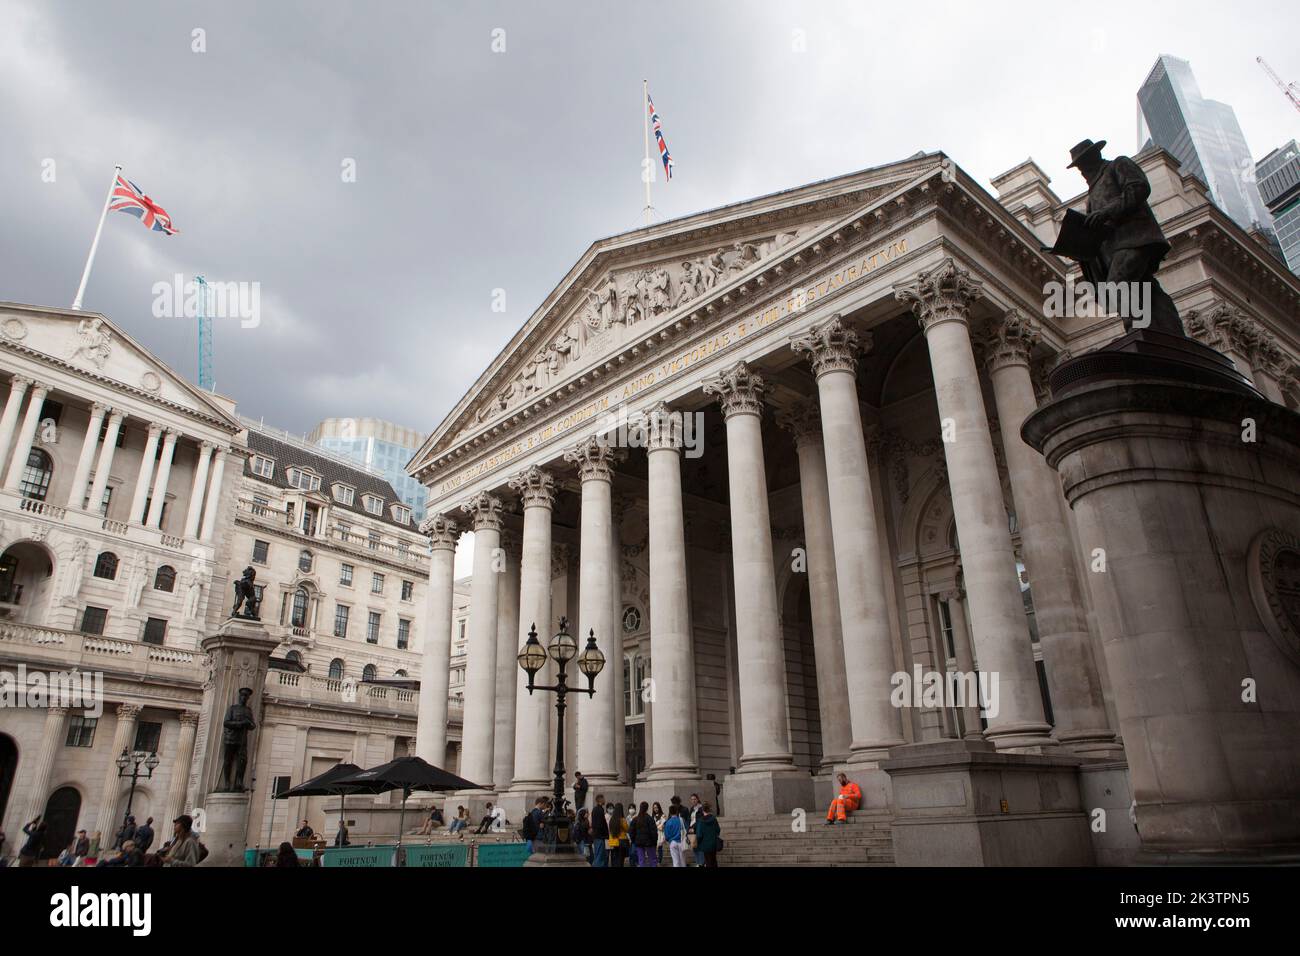 London, UK, 28 September 2022: Stormy skies over the Bank of England (left) in the heart of the City of London financial district. The Bank of England has taken emergency steps to calm the market for pounds sterling after Kwasi Kwateng's controversial mini-budget. Anna Watson/Alamy Live News Stock Photo